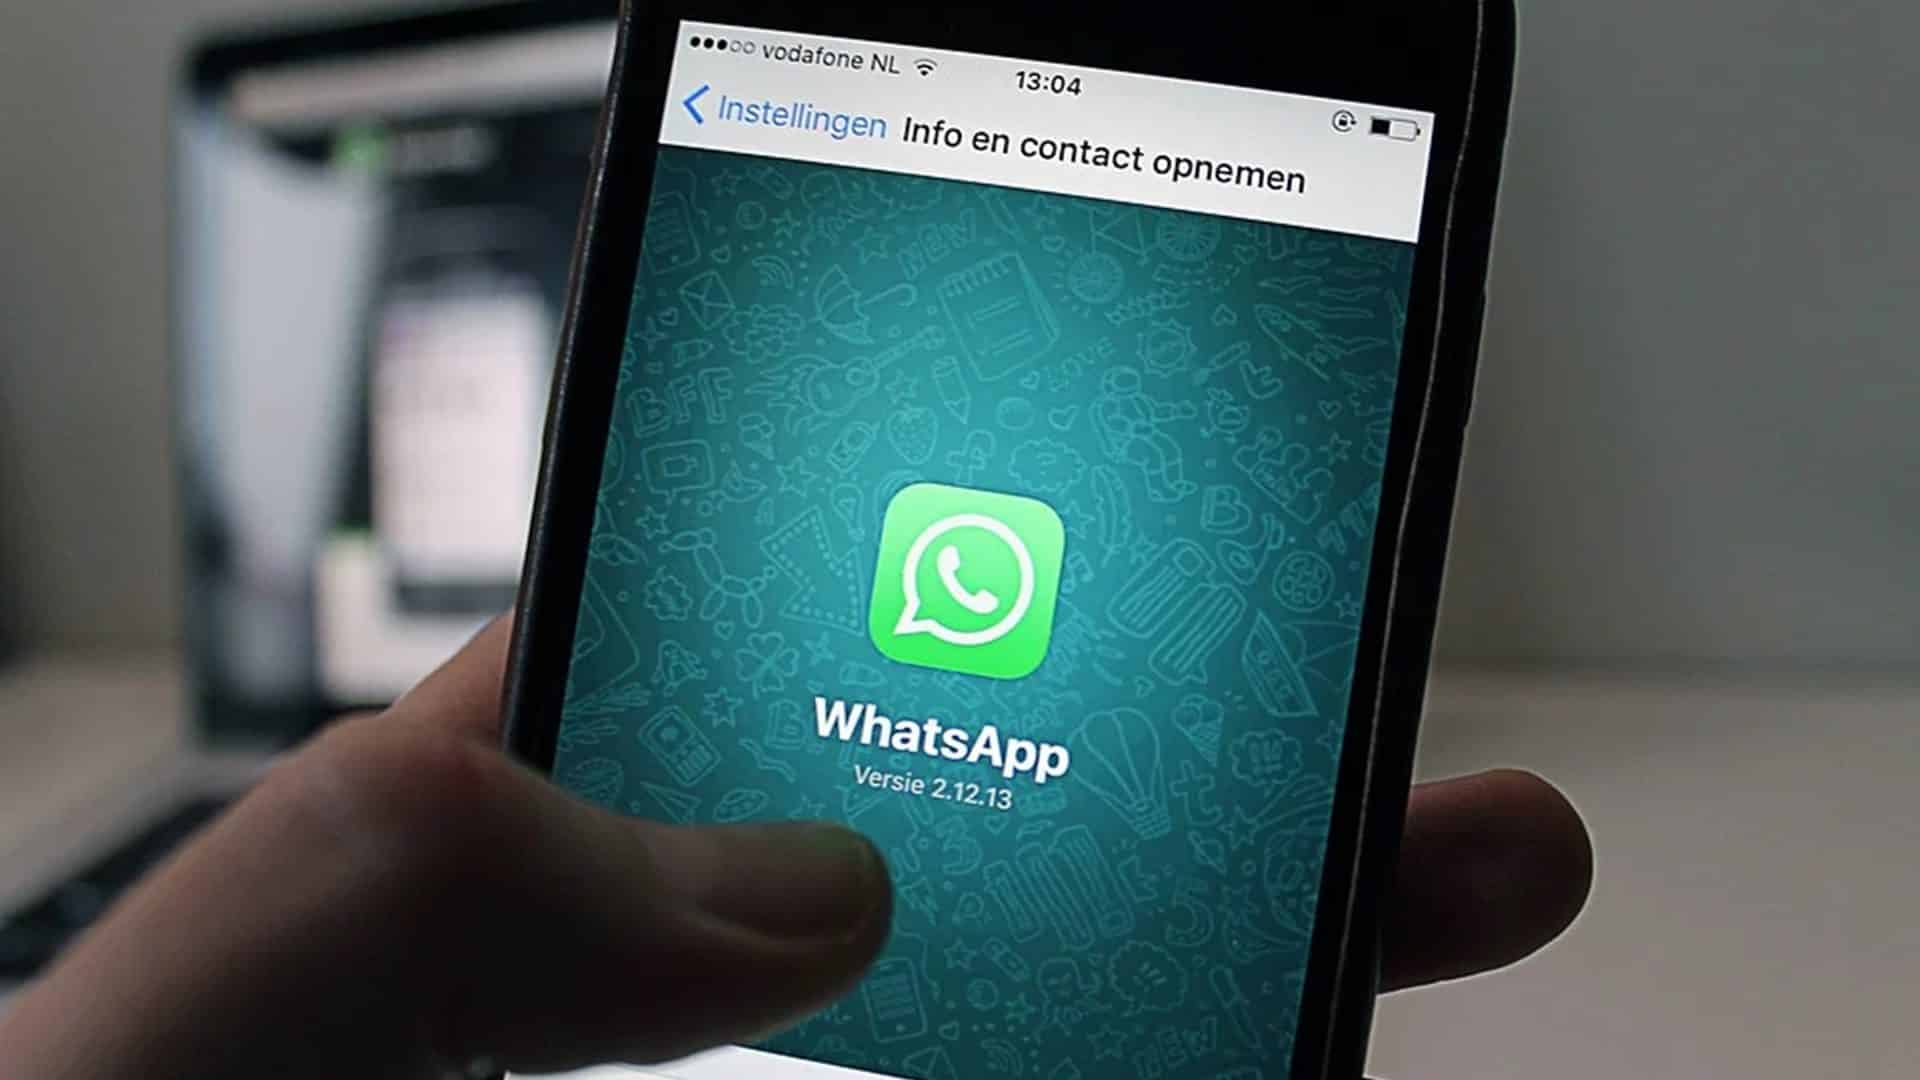 WhatsApp will compel users to agree to its new privacy policies for now